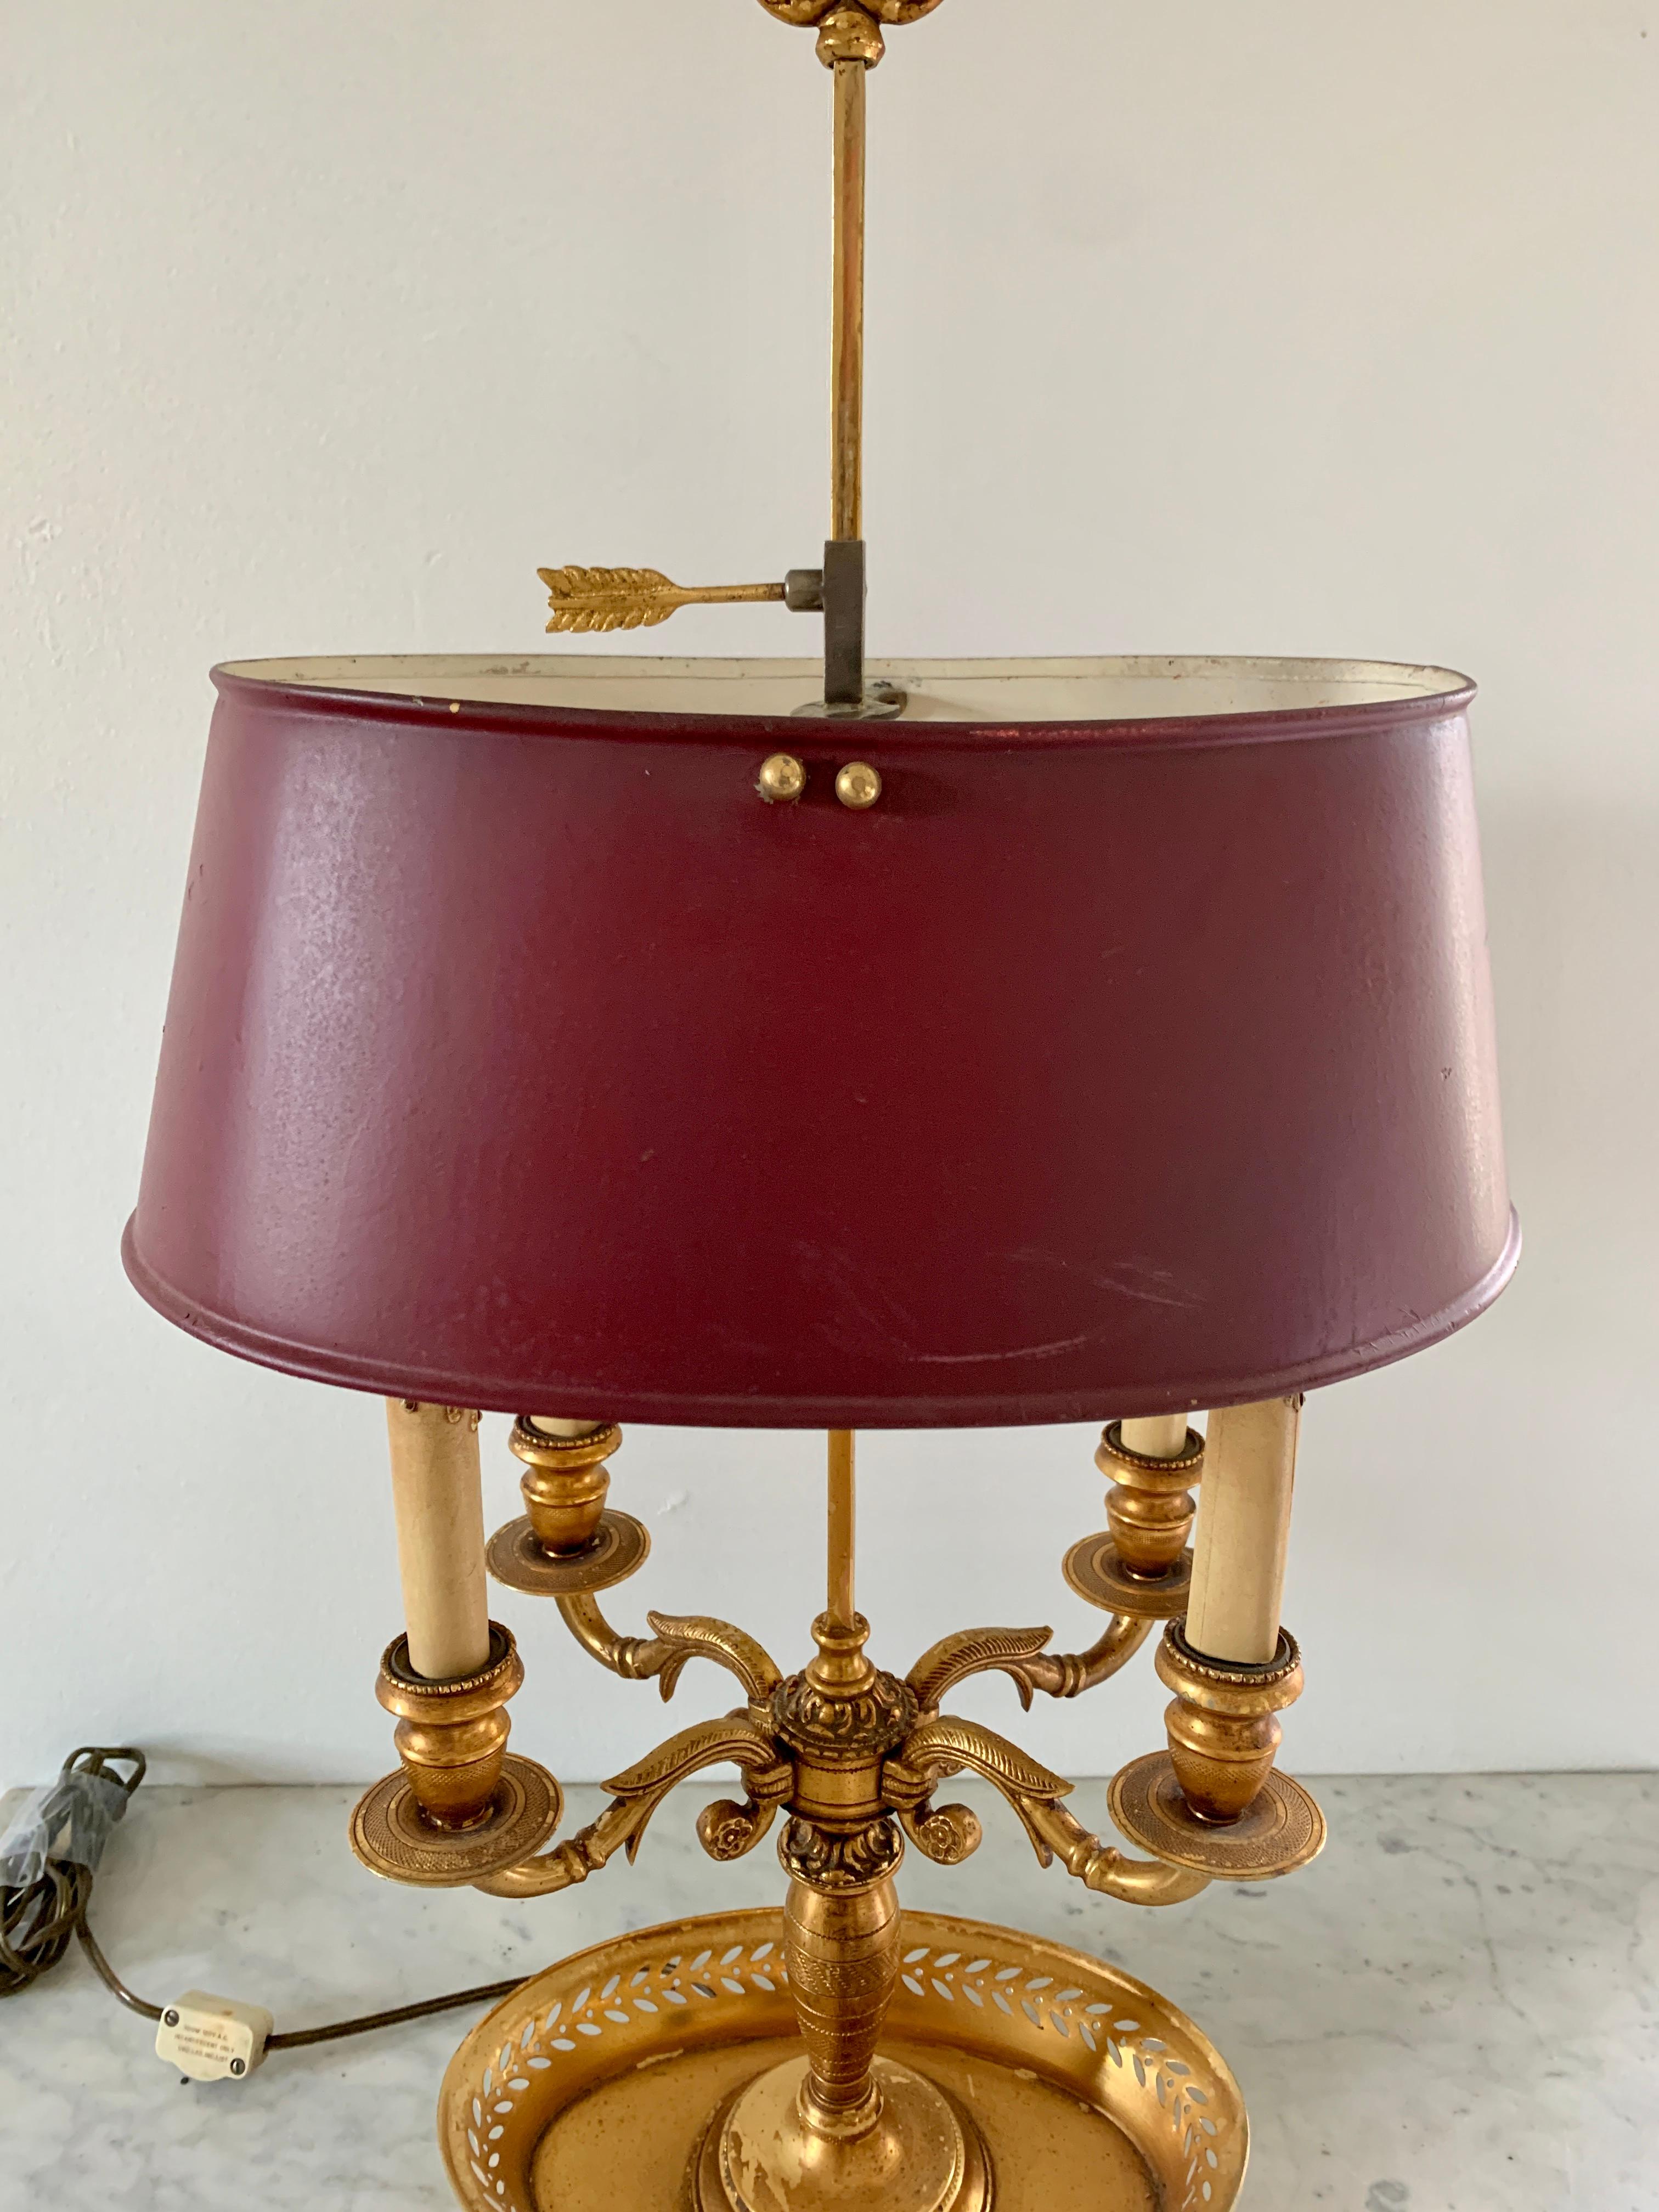 French Provincial Early 20th Century Brass Four Arm Bouillotte Lamp with Burgundy Tole Shade For Sale